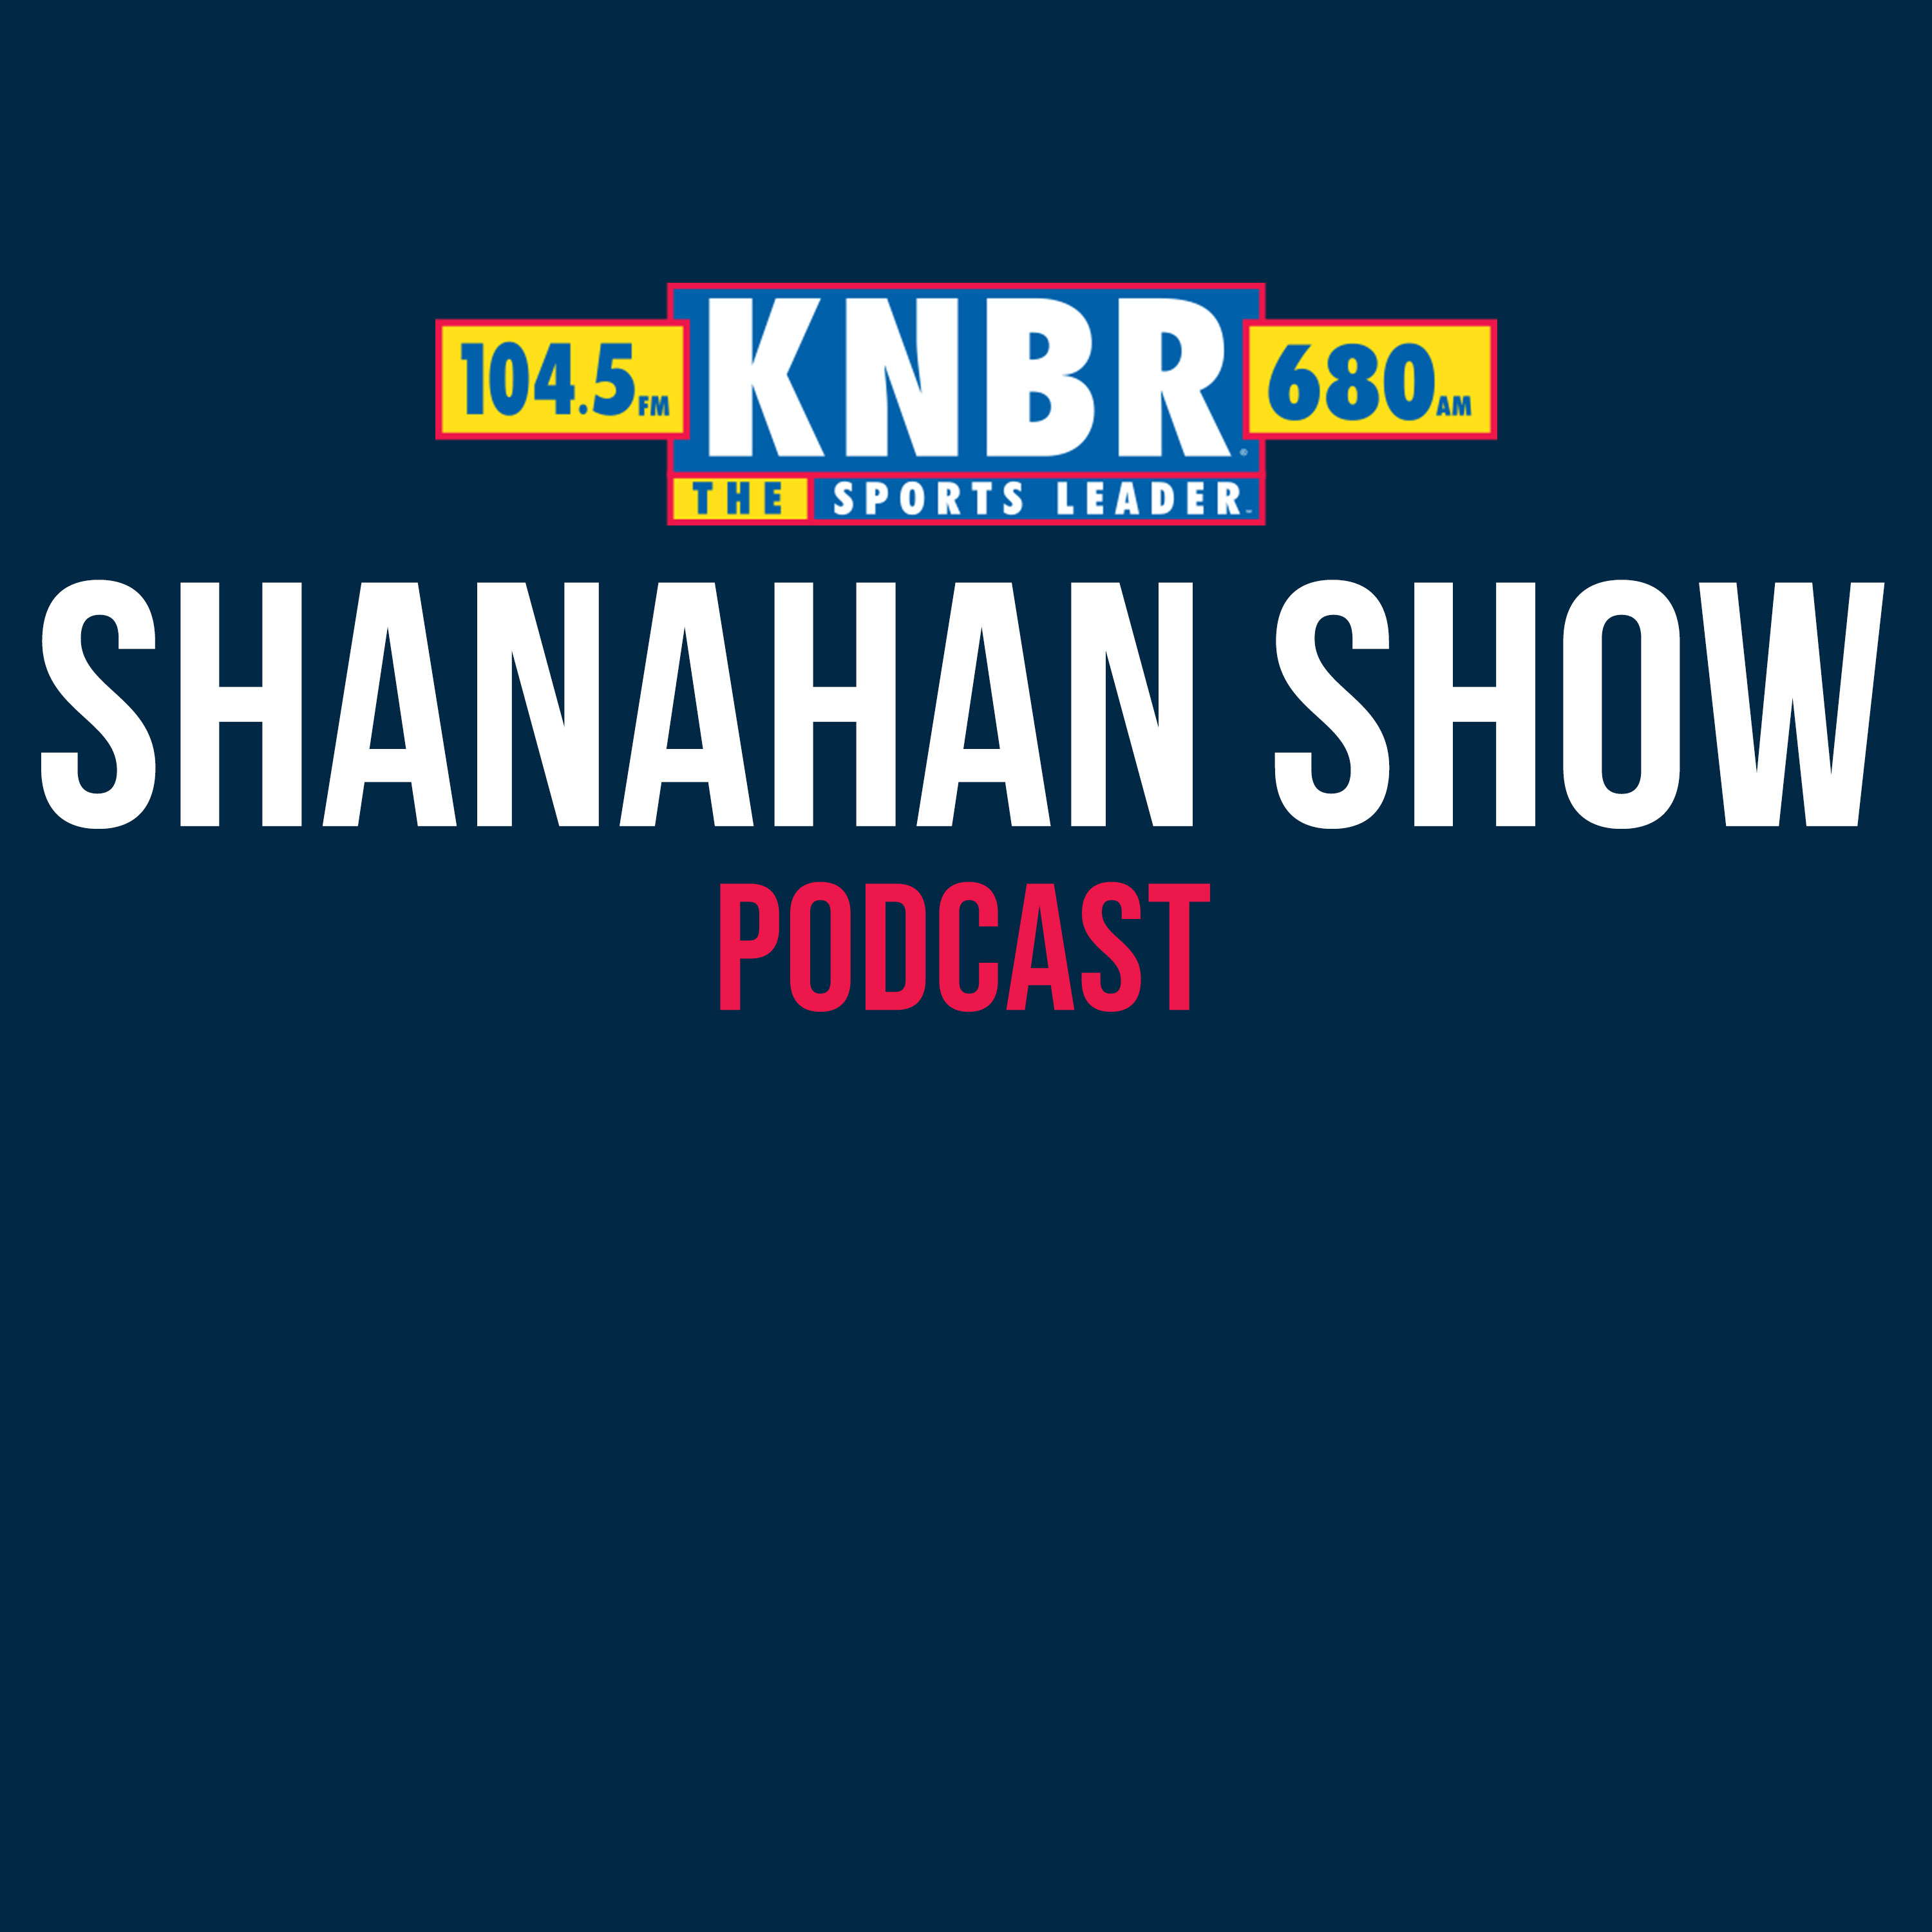 10-31 Kyle Shanahan joins Tolbert & Copes to discuss how the 49ers shake the 3 game losing streak coming out of the bye